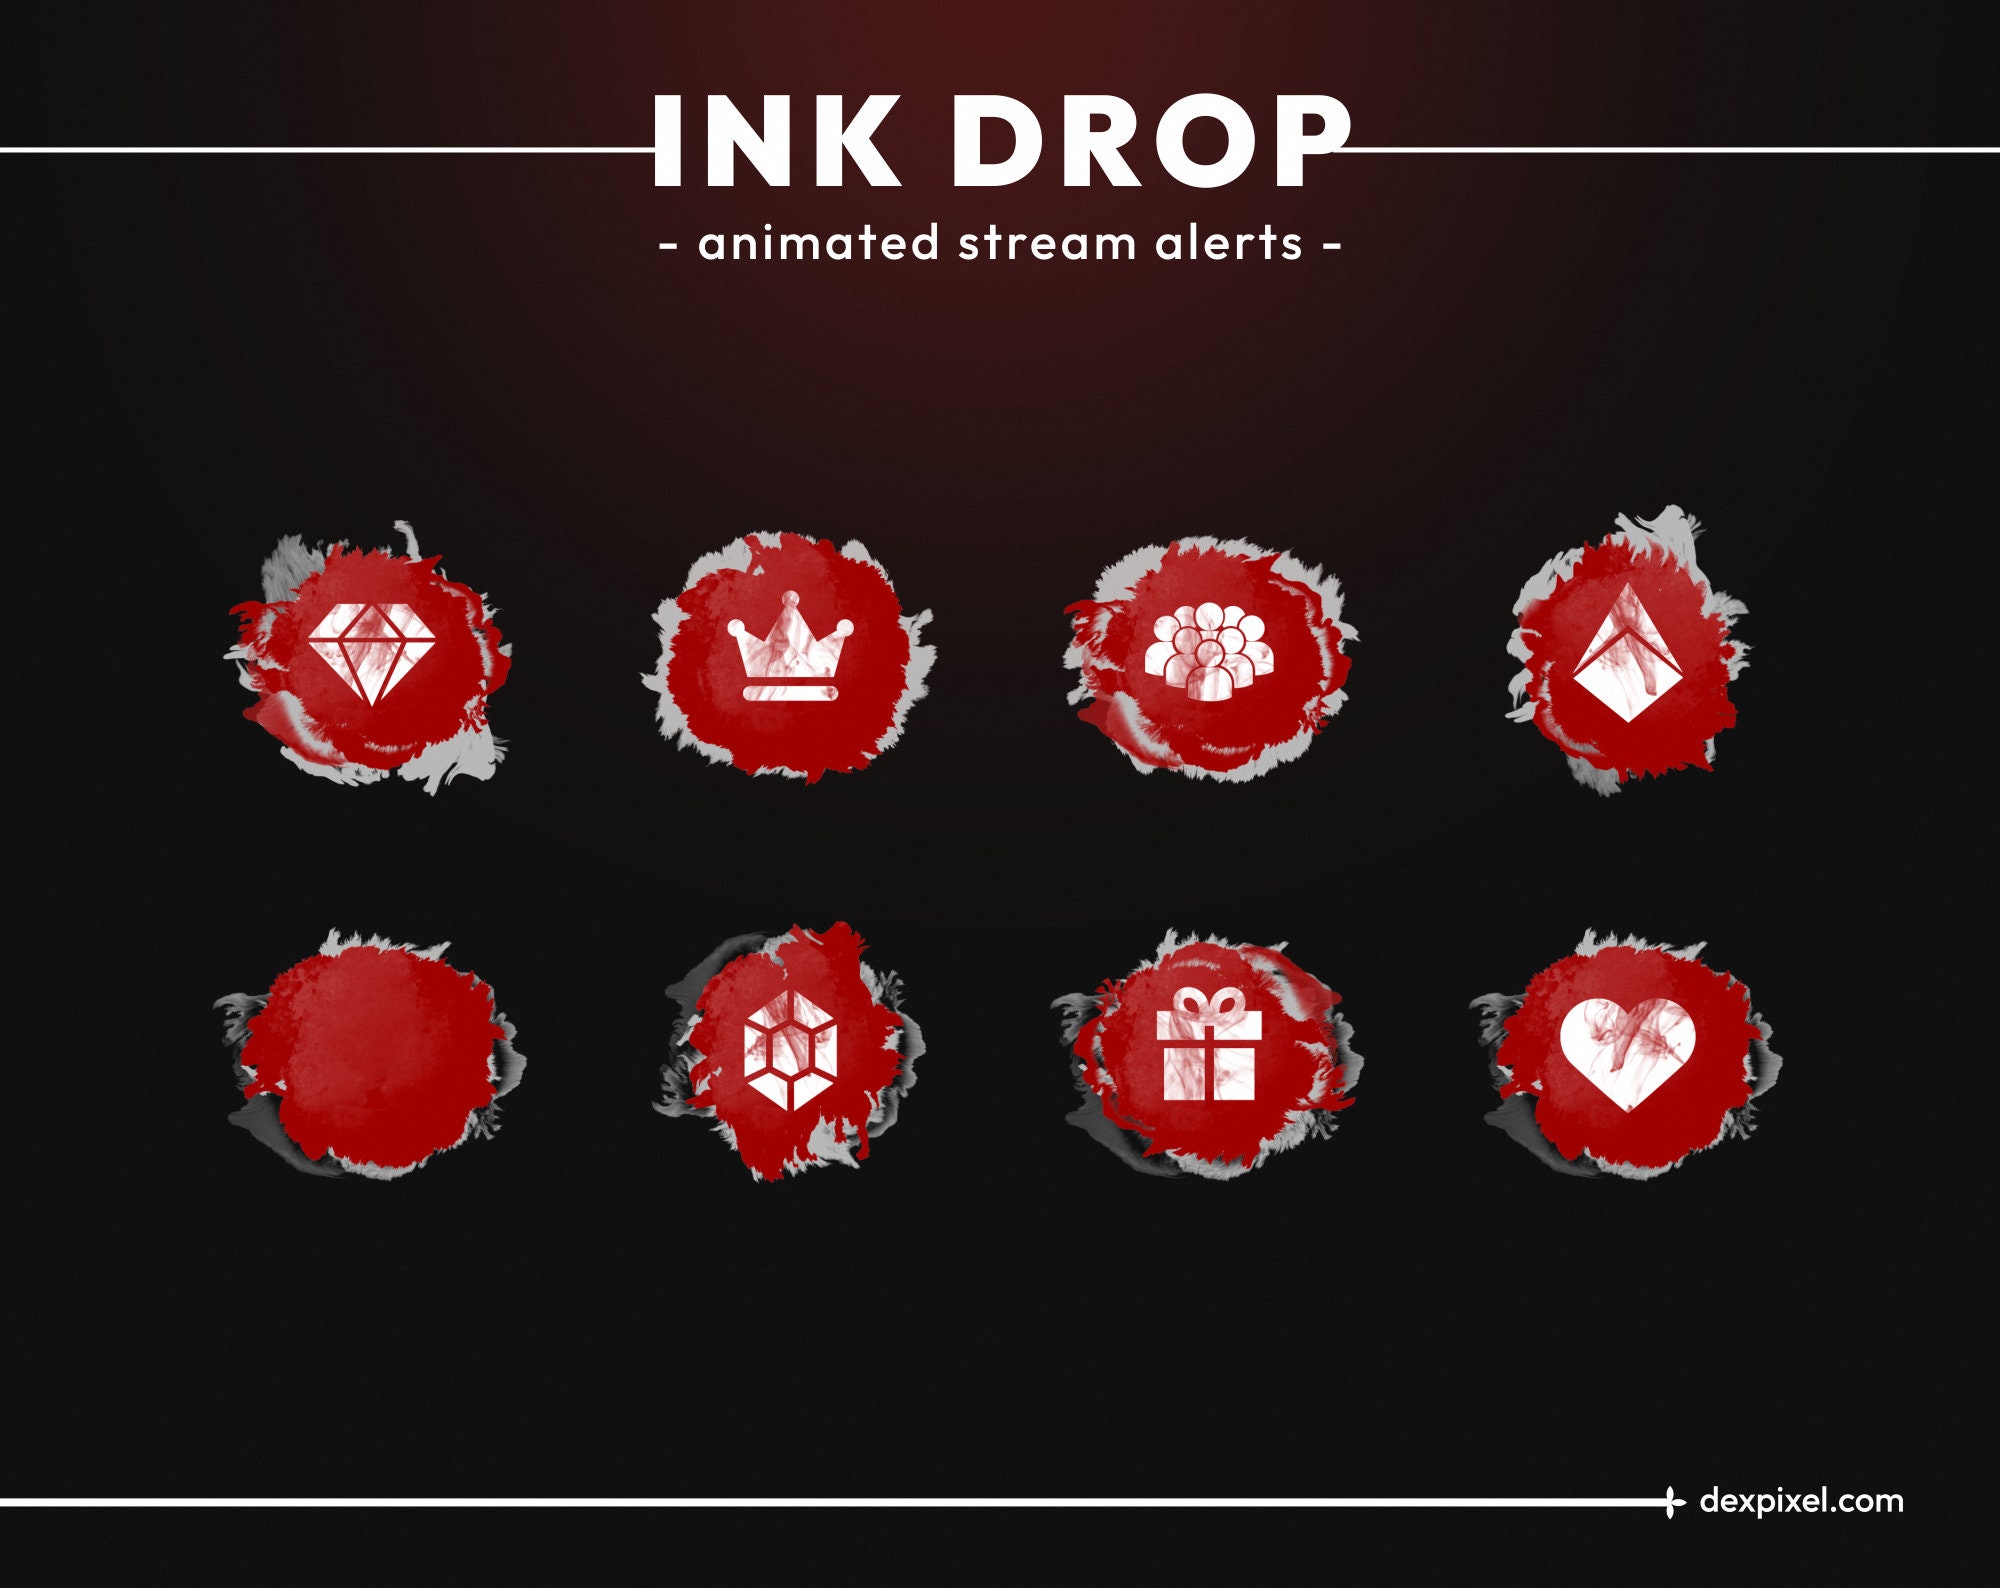 koks twinkle hed Red and White Ink Drop Animated Twitch Stream Alerts Ink - Etsy